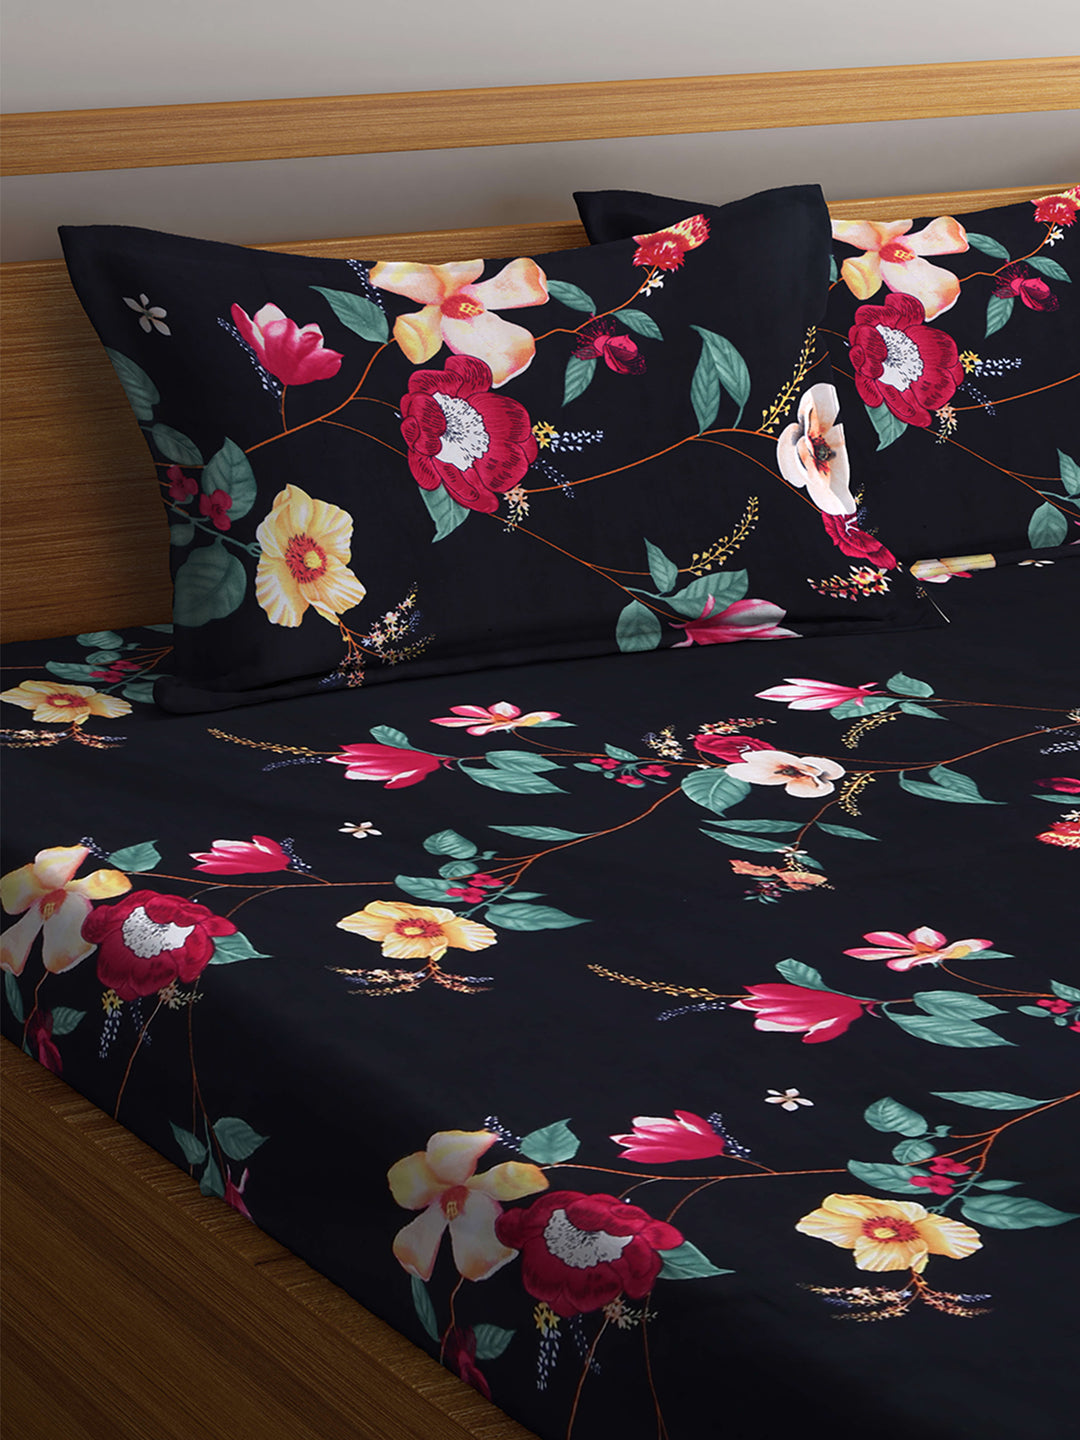 Arrabi Black Floral TC Cotton Blend Double Size Fitted Bedsheet with 2 Pillow Covers (250 X 220 cm)